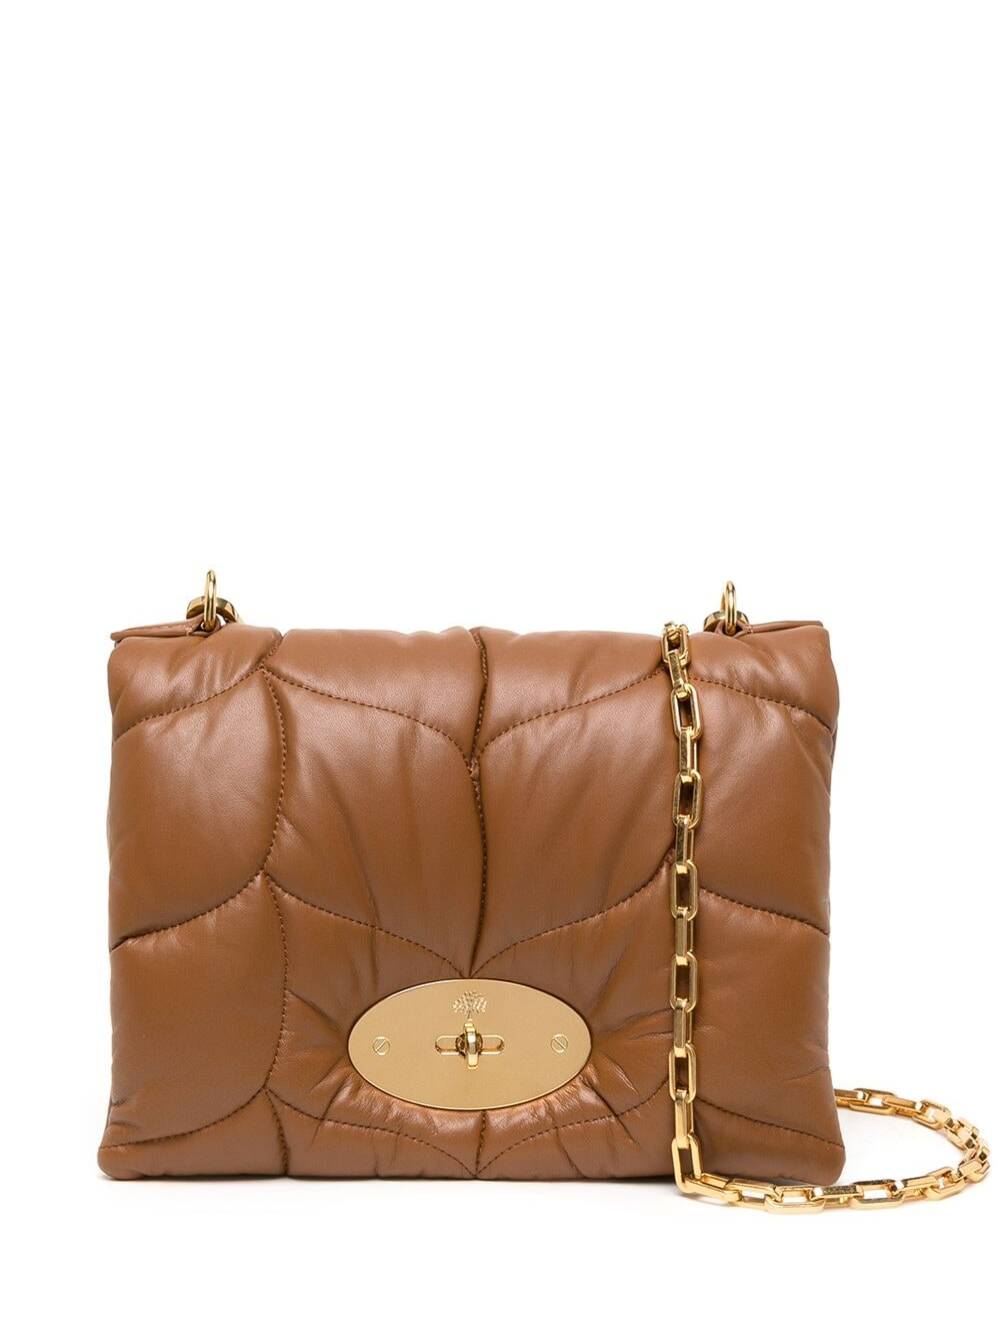 MULBERRY LITTLE SOFTIE BROWN CROSS-BODY BAG WITH TWIST LOCK CLOSURE IN QUILTED AND PADDED LEATHER WOMAN